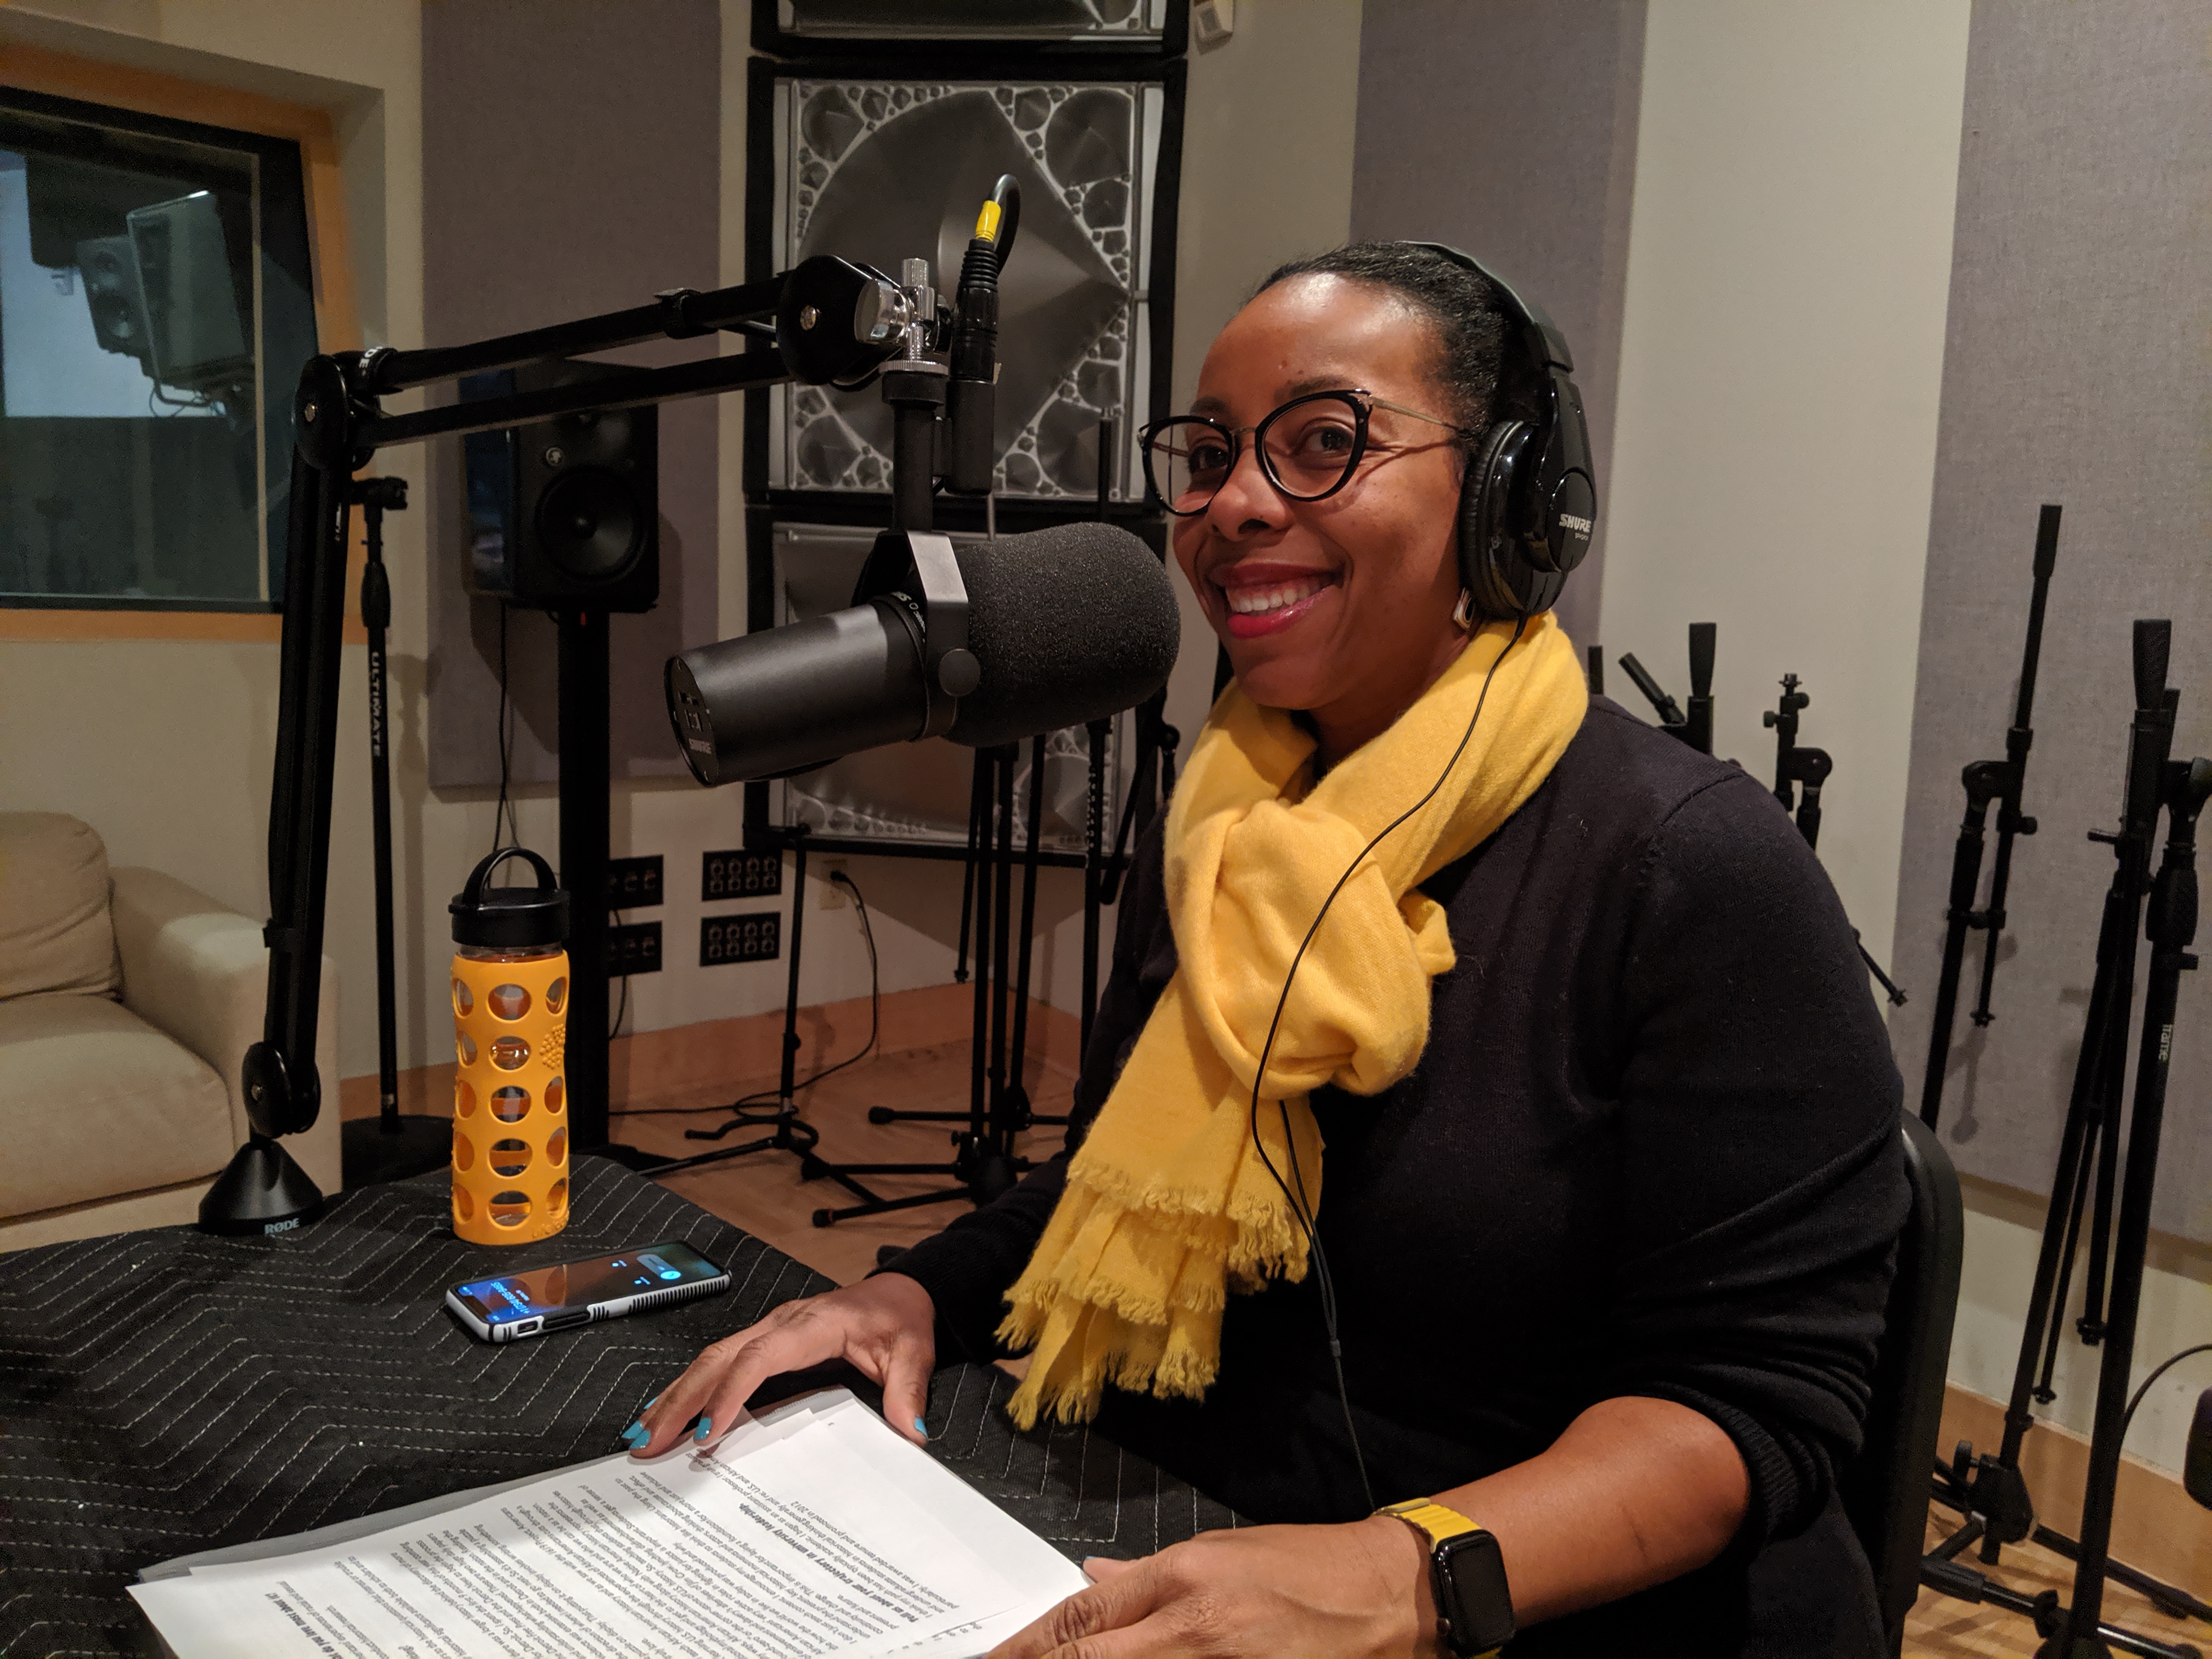 Kidada Williams in front of a microphone wearing headphones, black shirt and yellow scarf